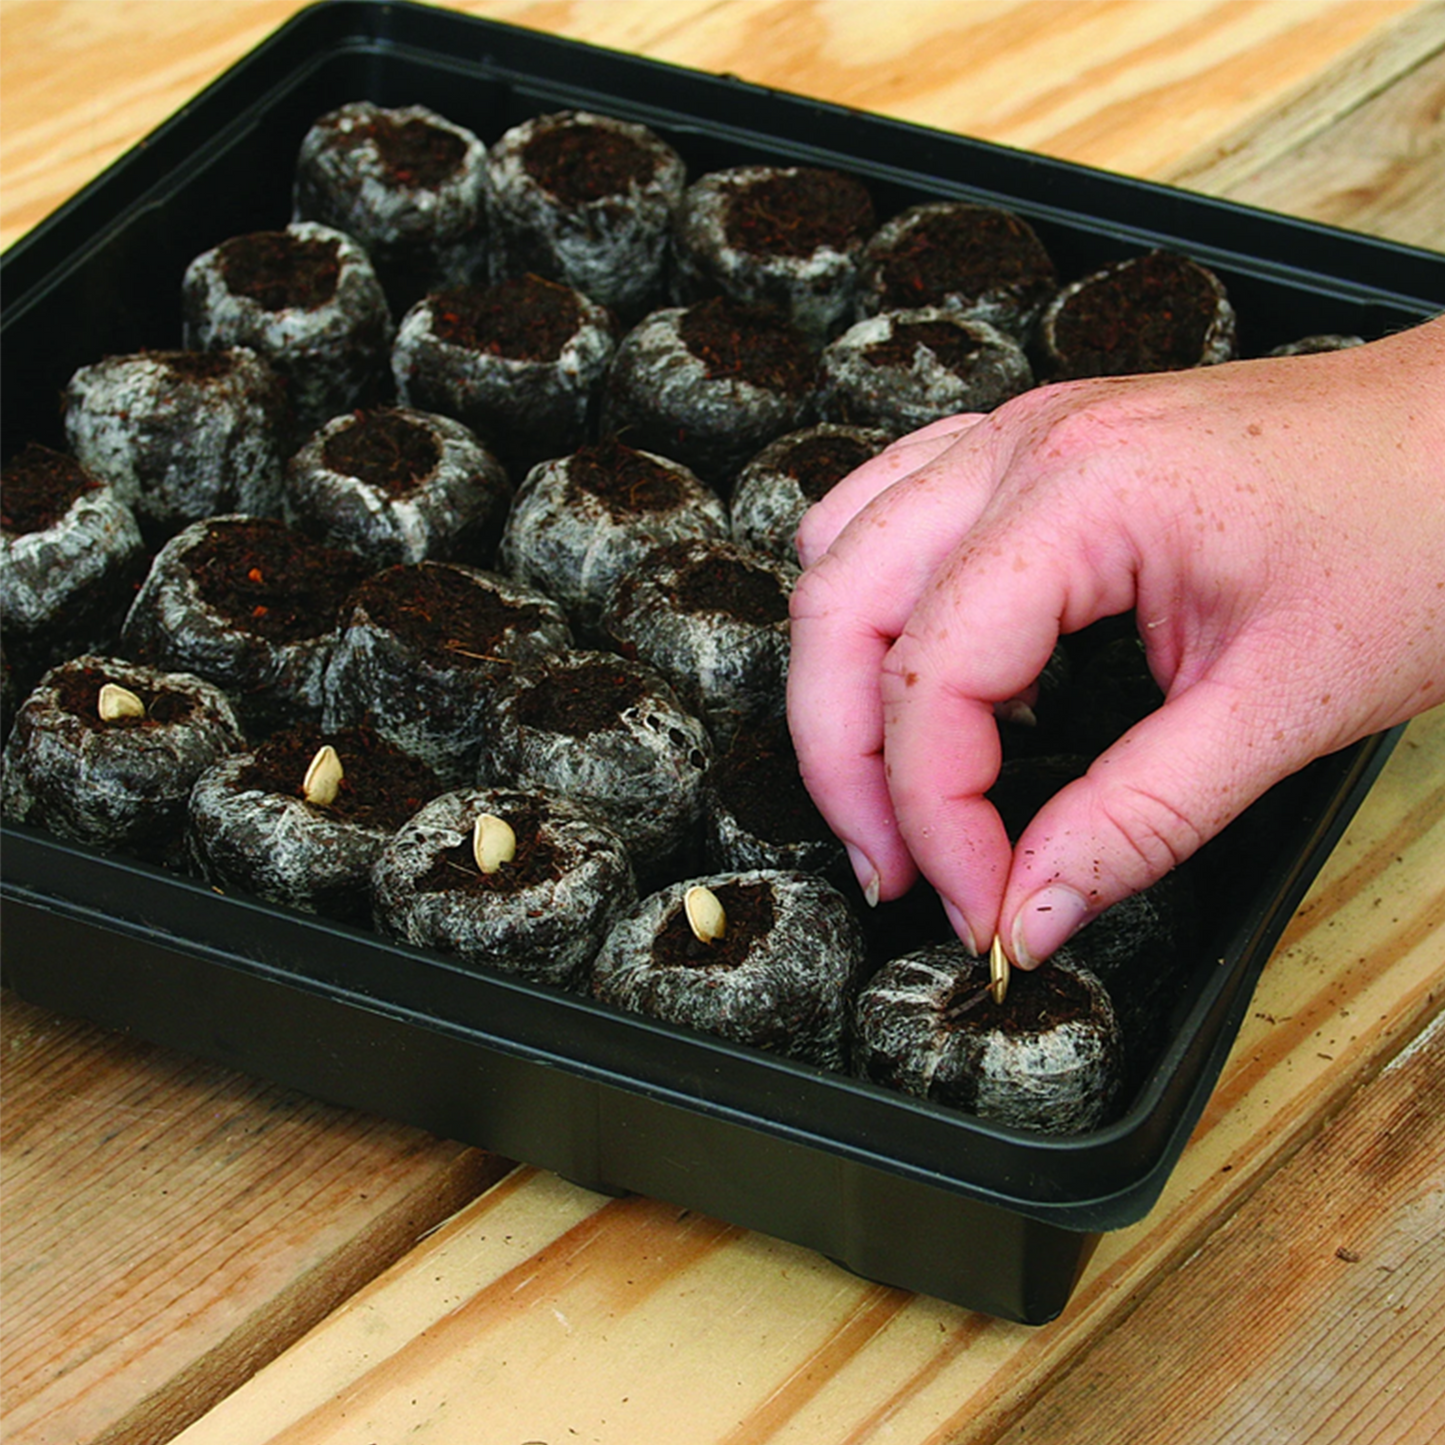 Seed starting greenhouse, close-up of gardener sowing seeds in expanded peat pellets.